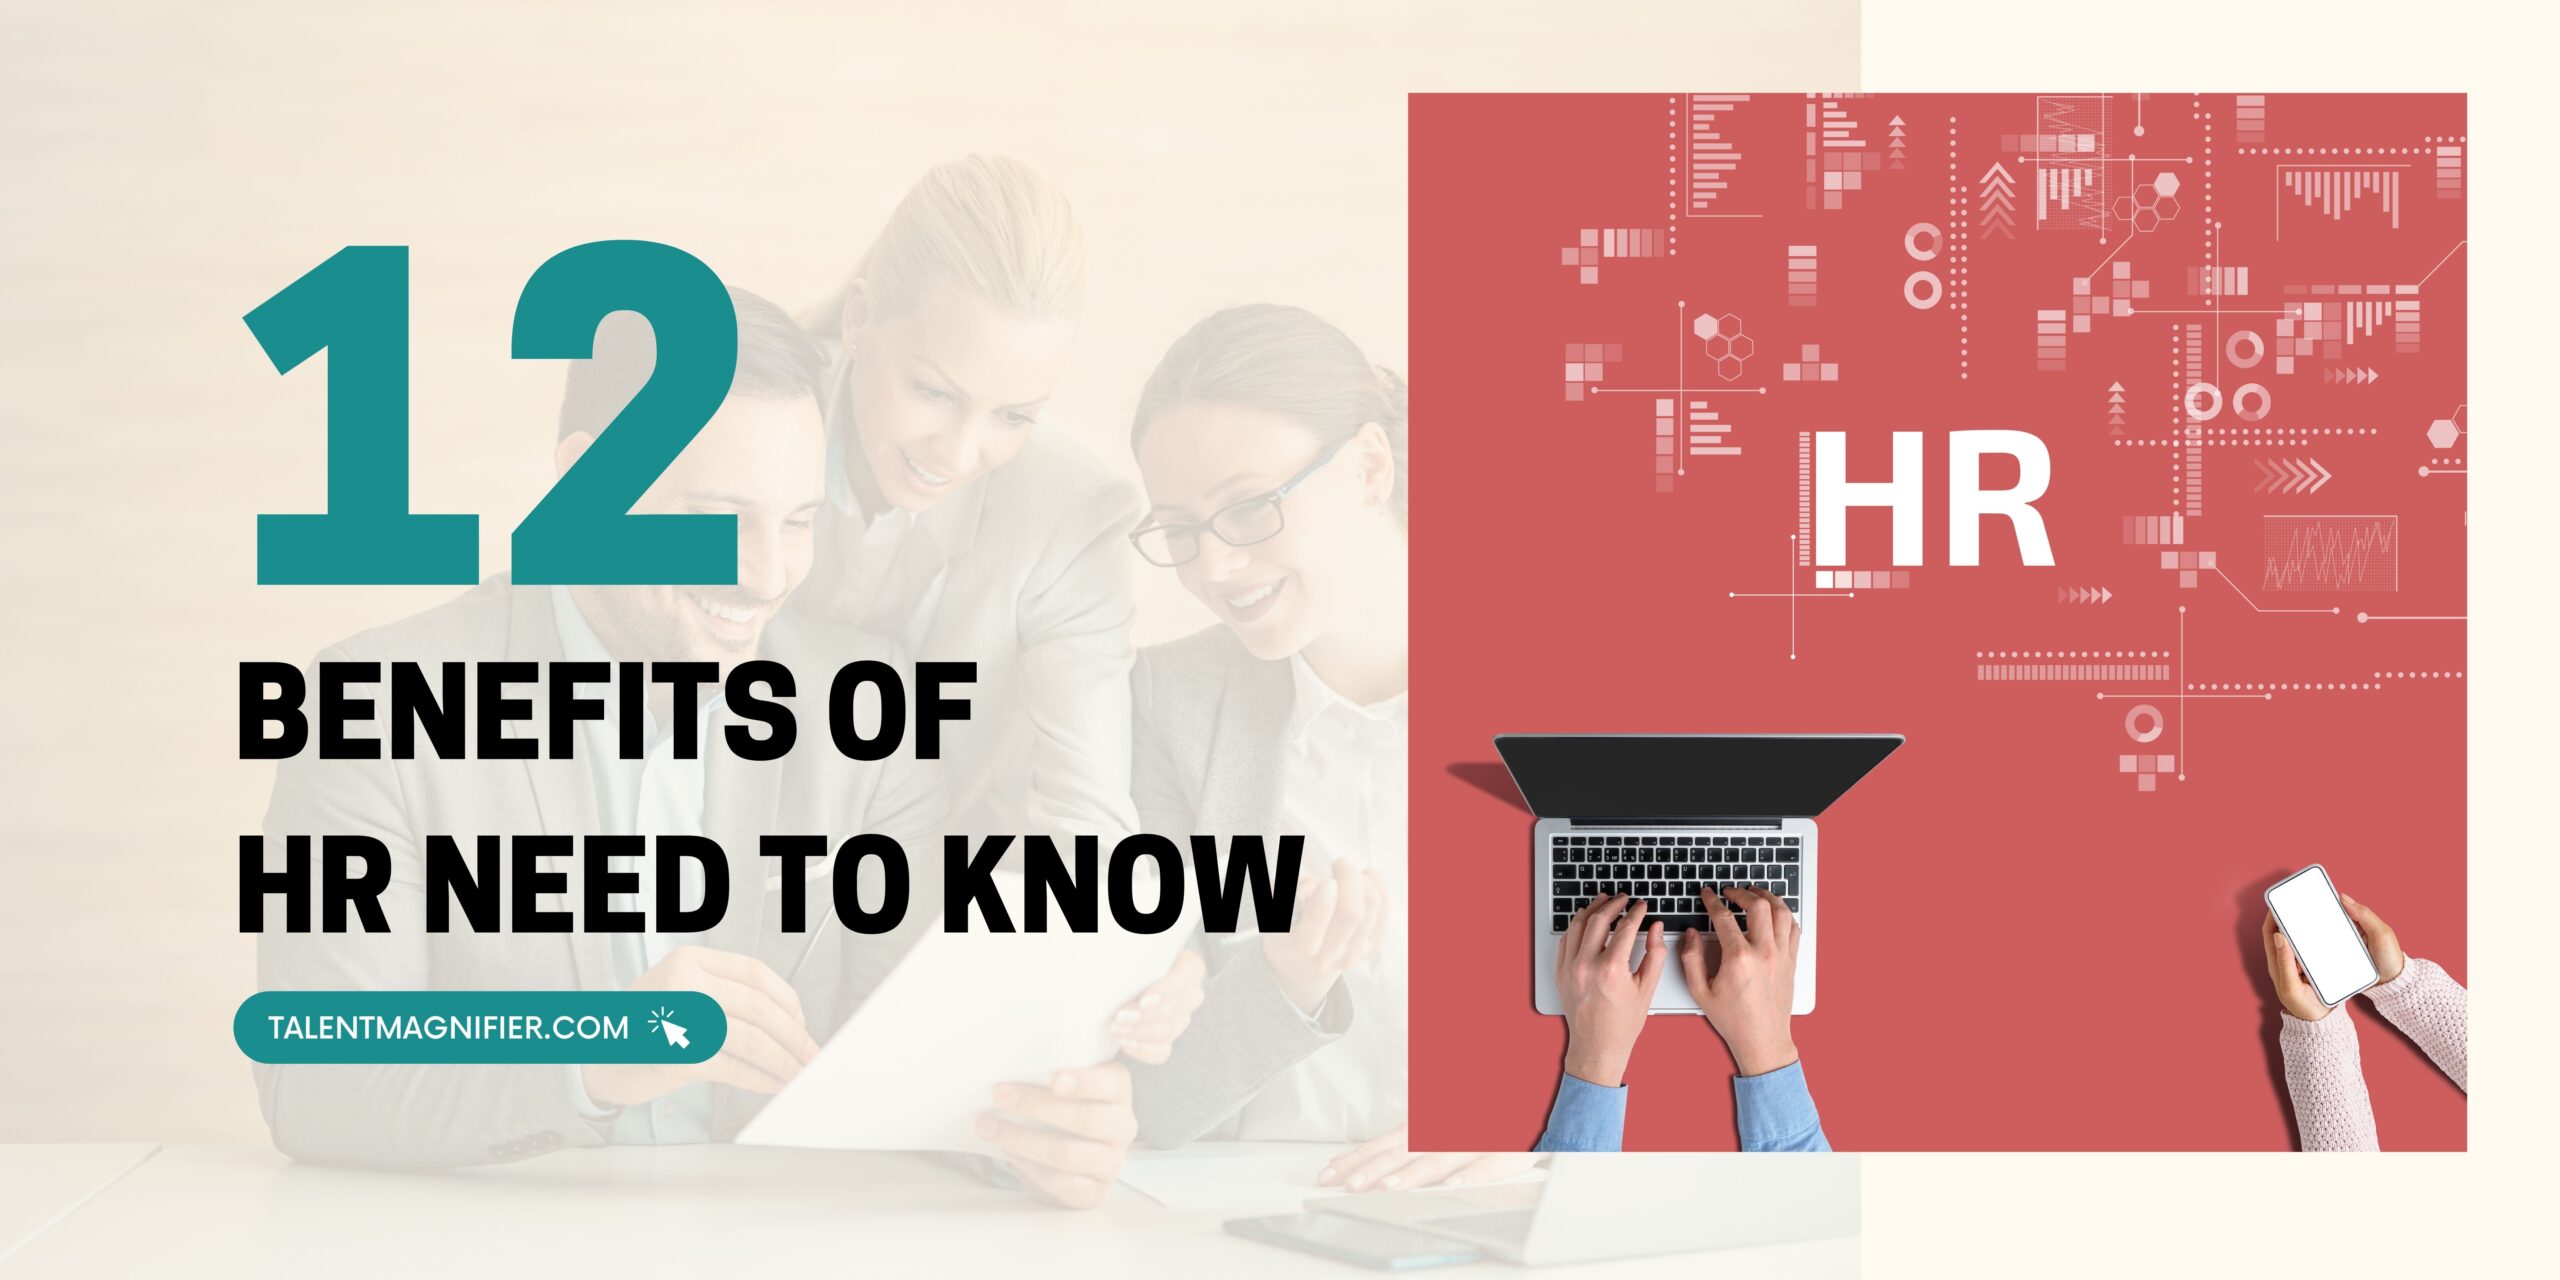 12 Benefits HR Need to Know